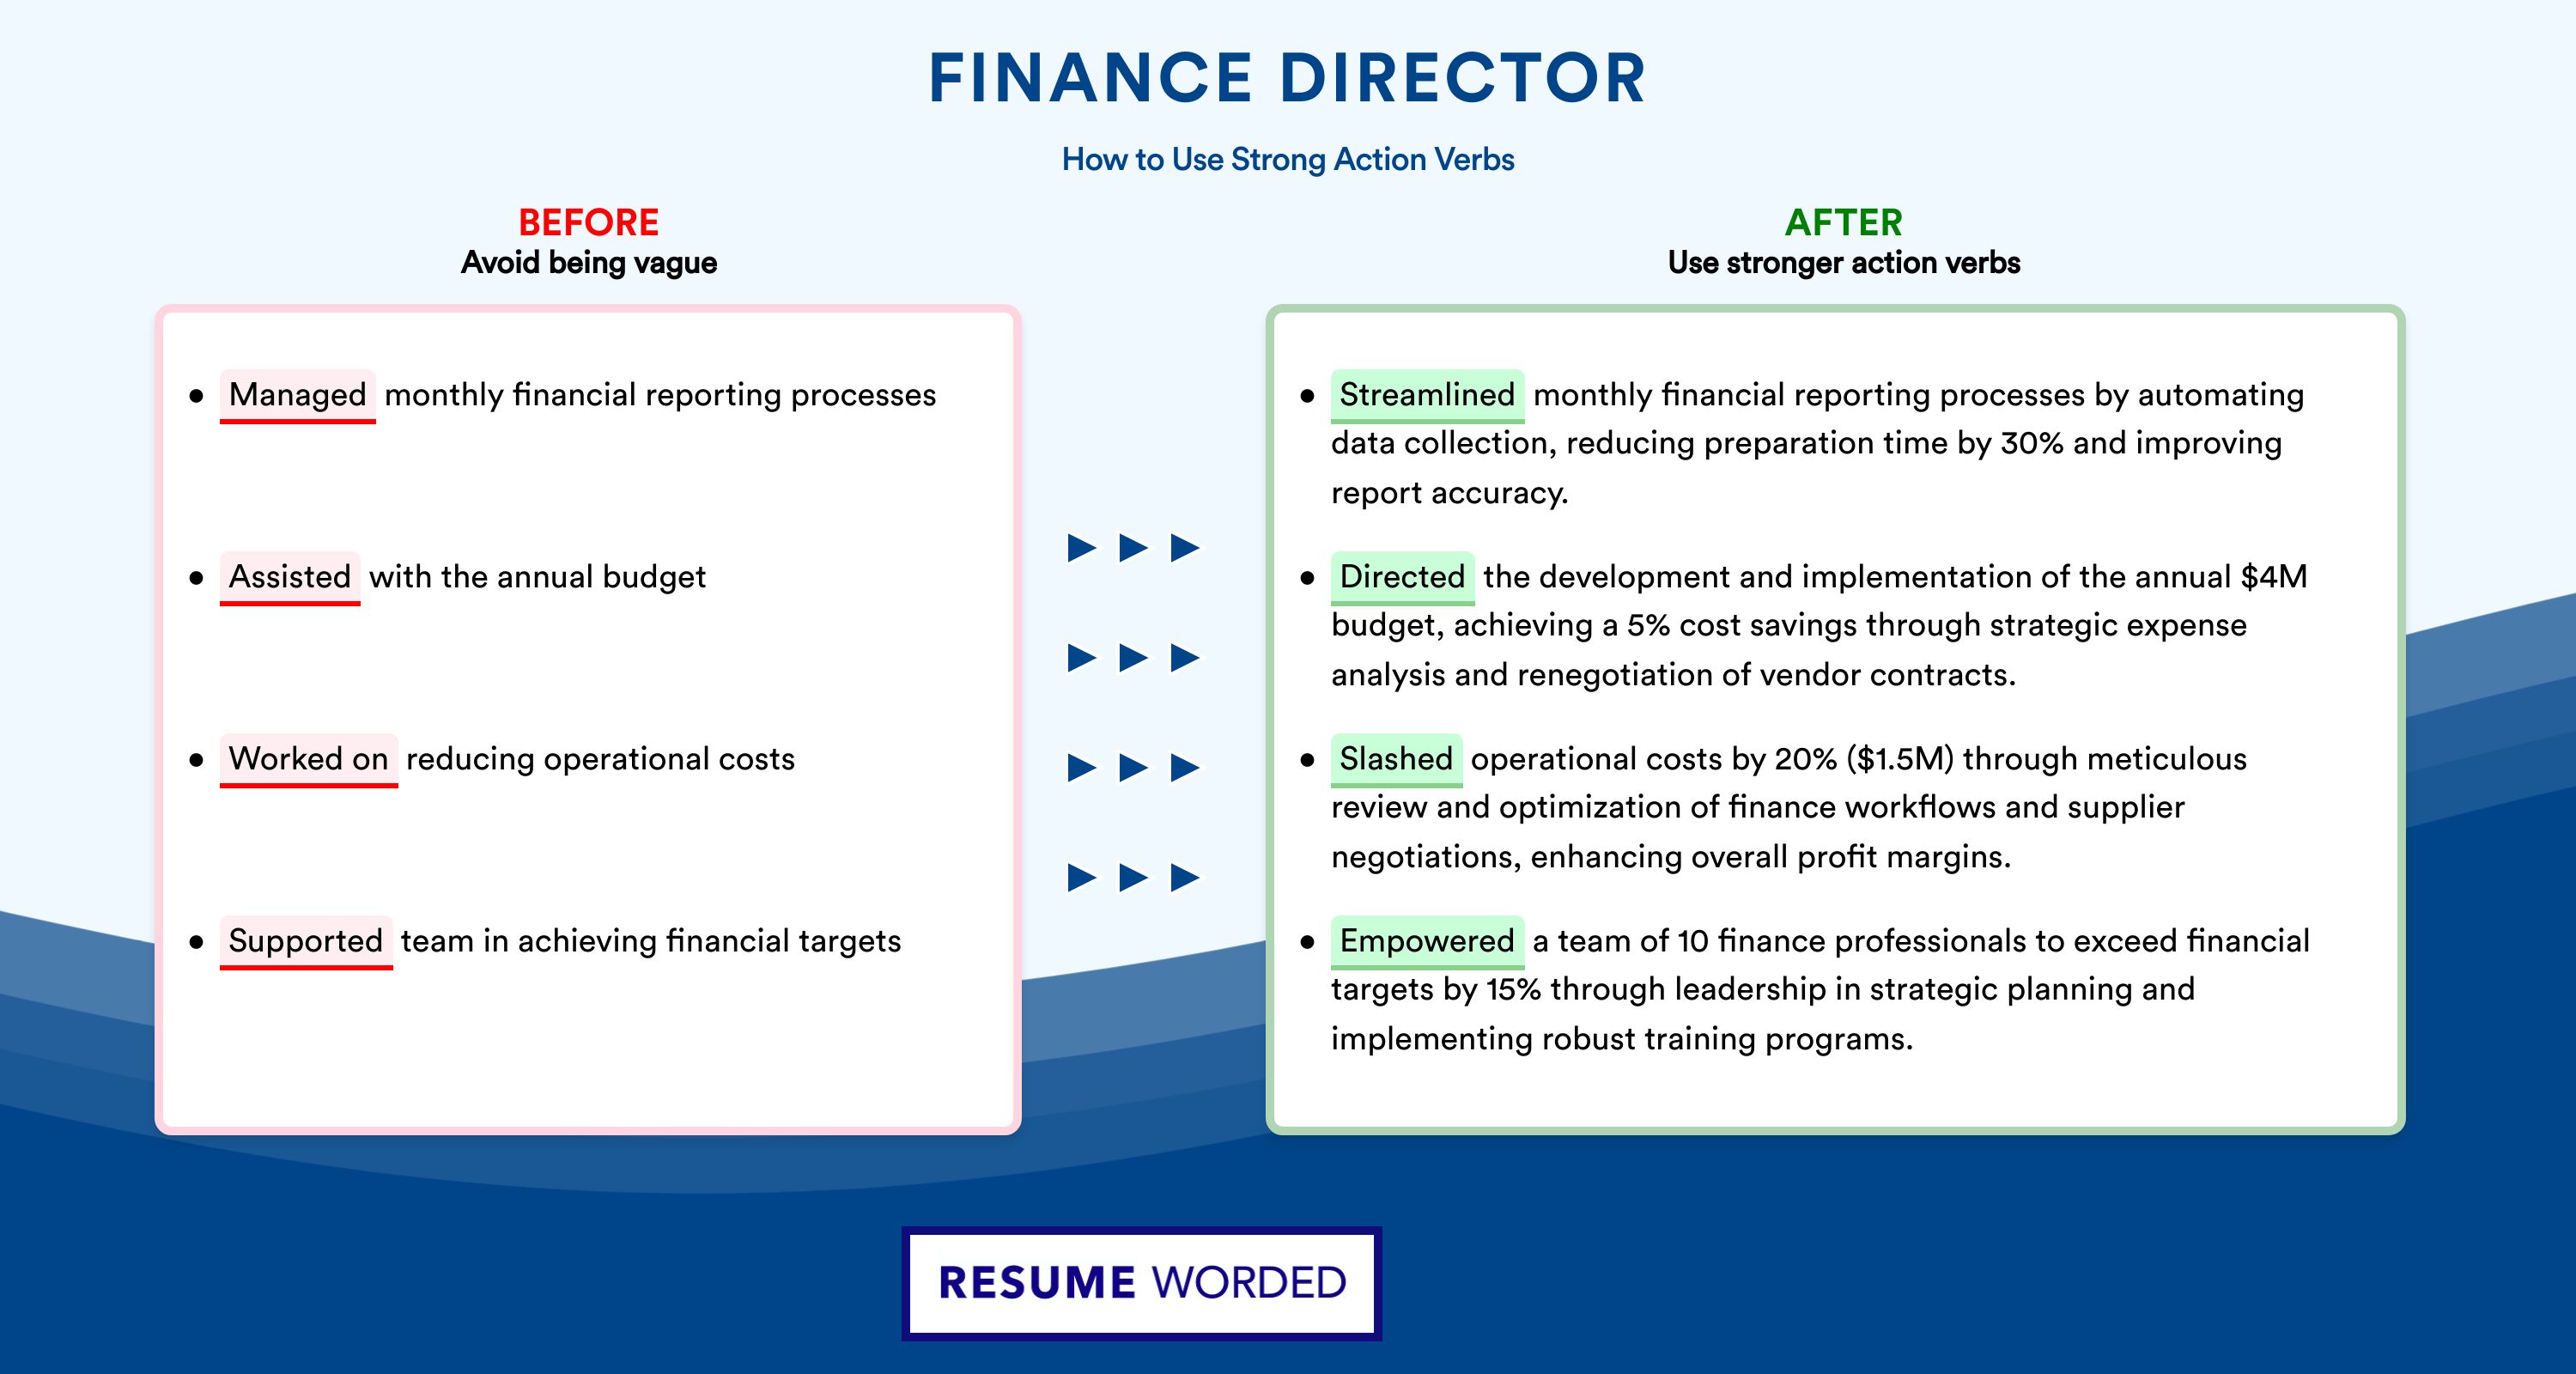 Action Verbs for Finance Director